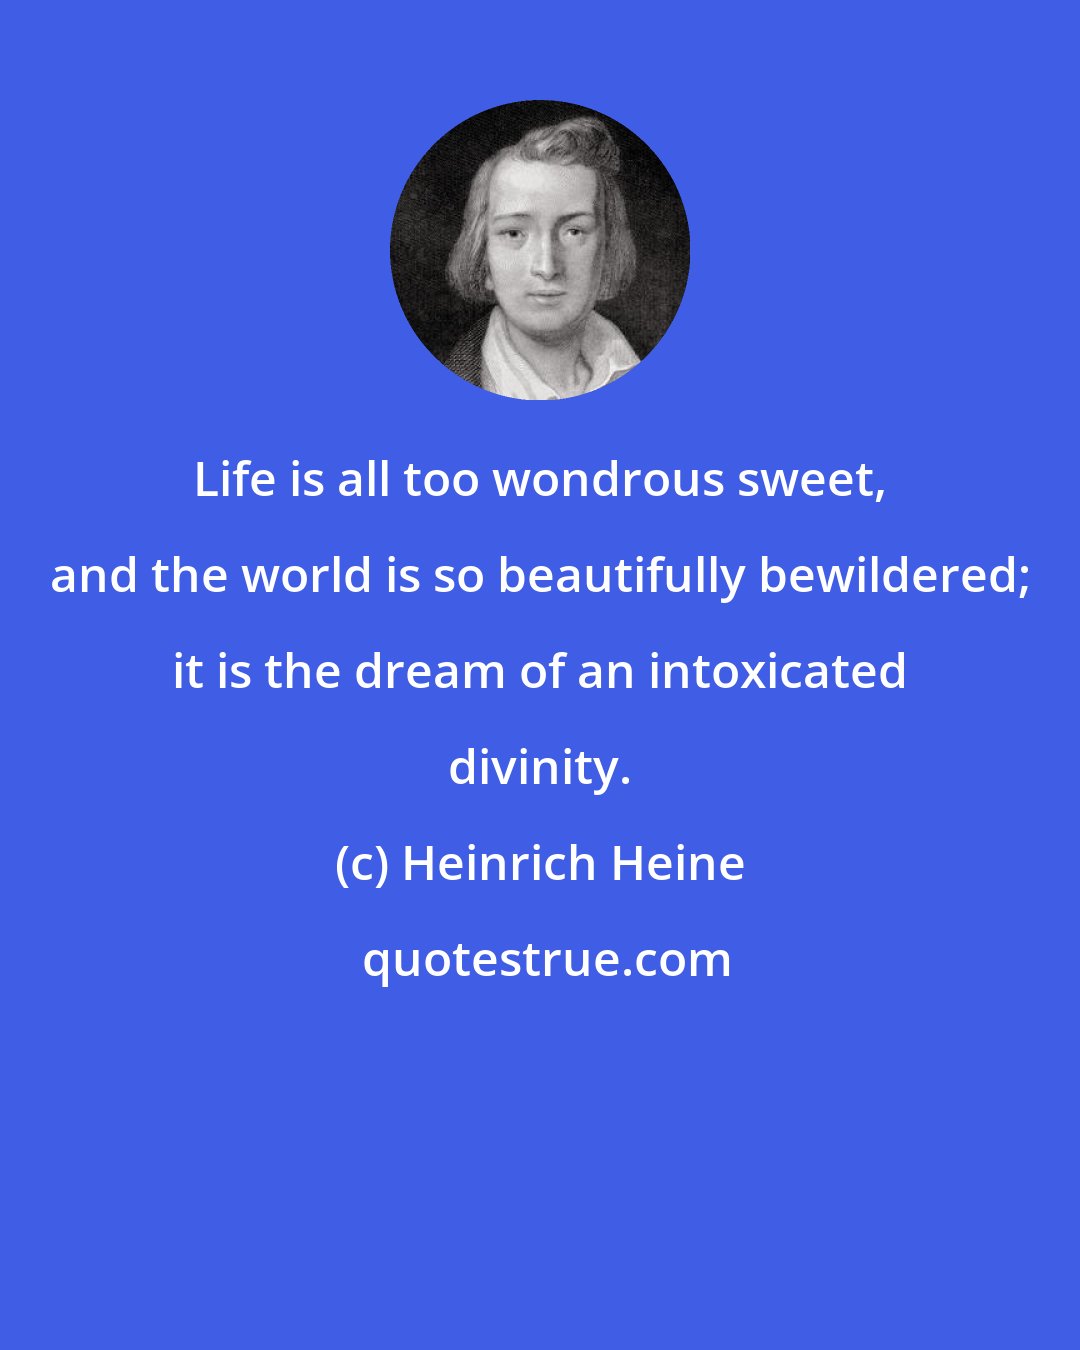 Heinrich Heine: Life is all too wondrous sweet, and the world is so beautifully bewildered; it is the dream of an intoxicated divinity.